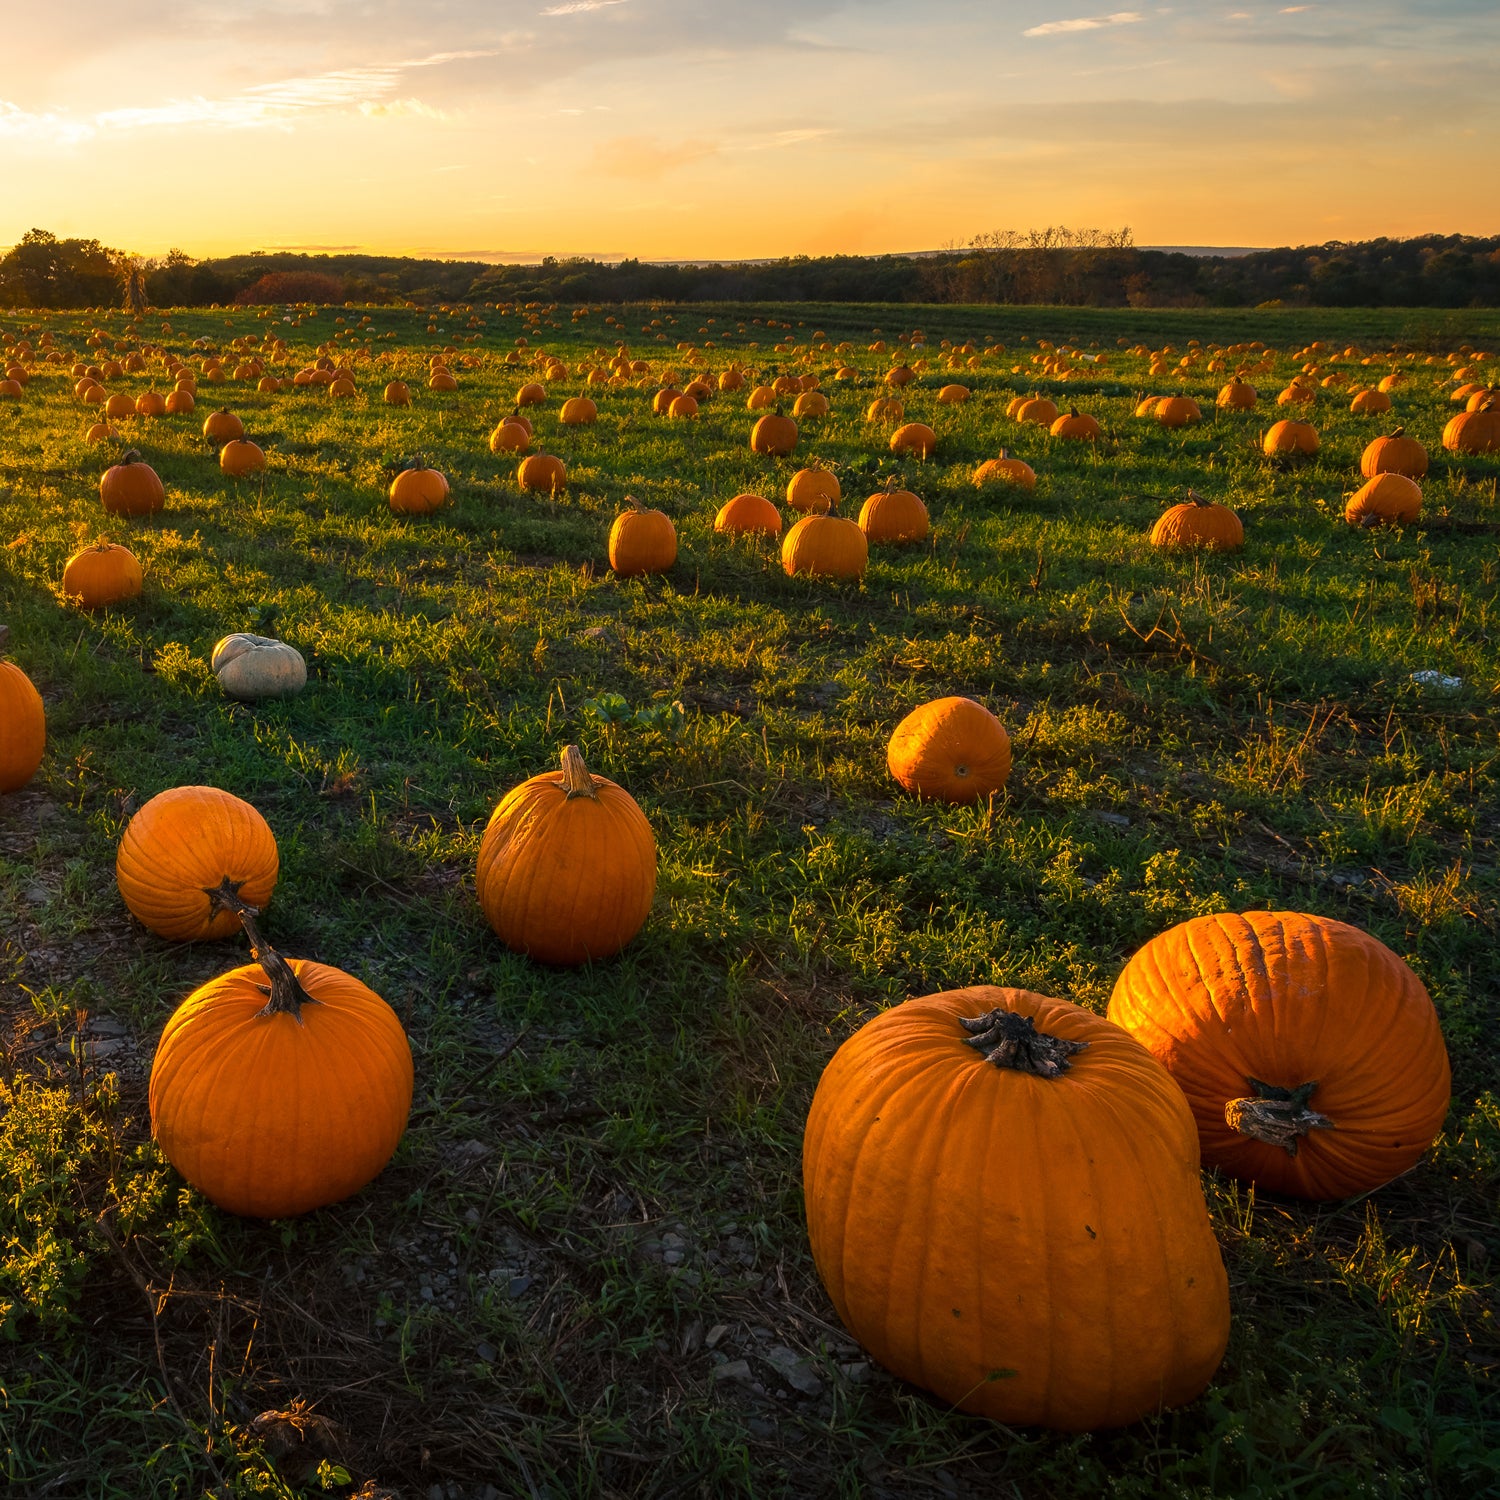 A pumpkin patch at dusk in the fall - inspiration for our Fall Festival wax melt fragrance bars